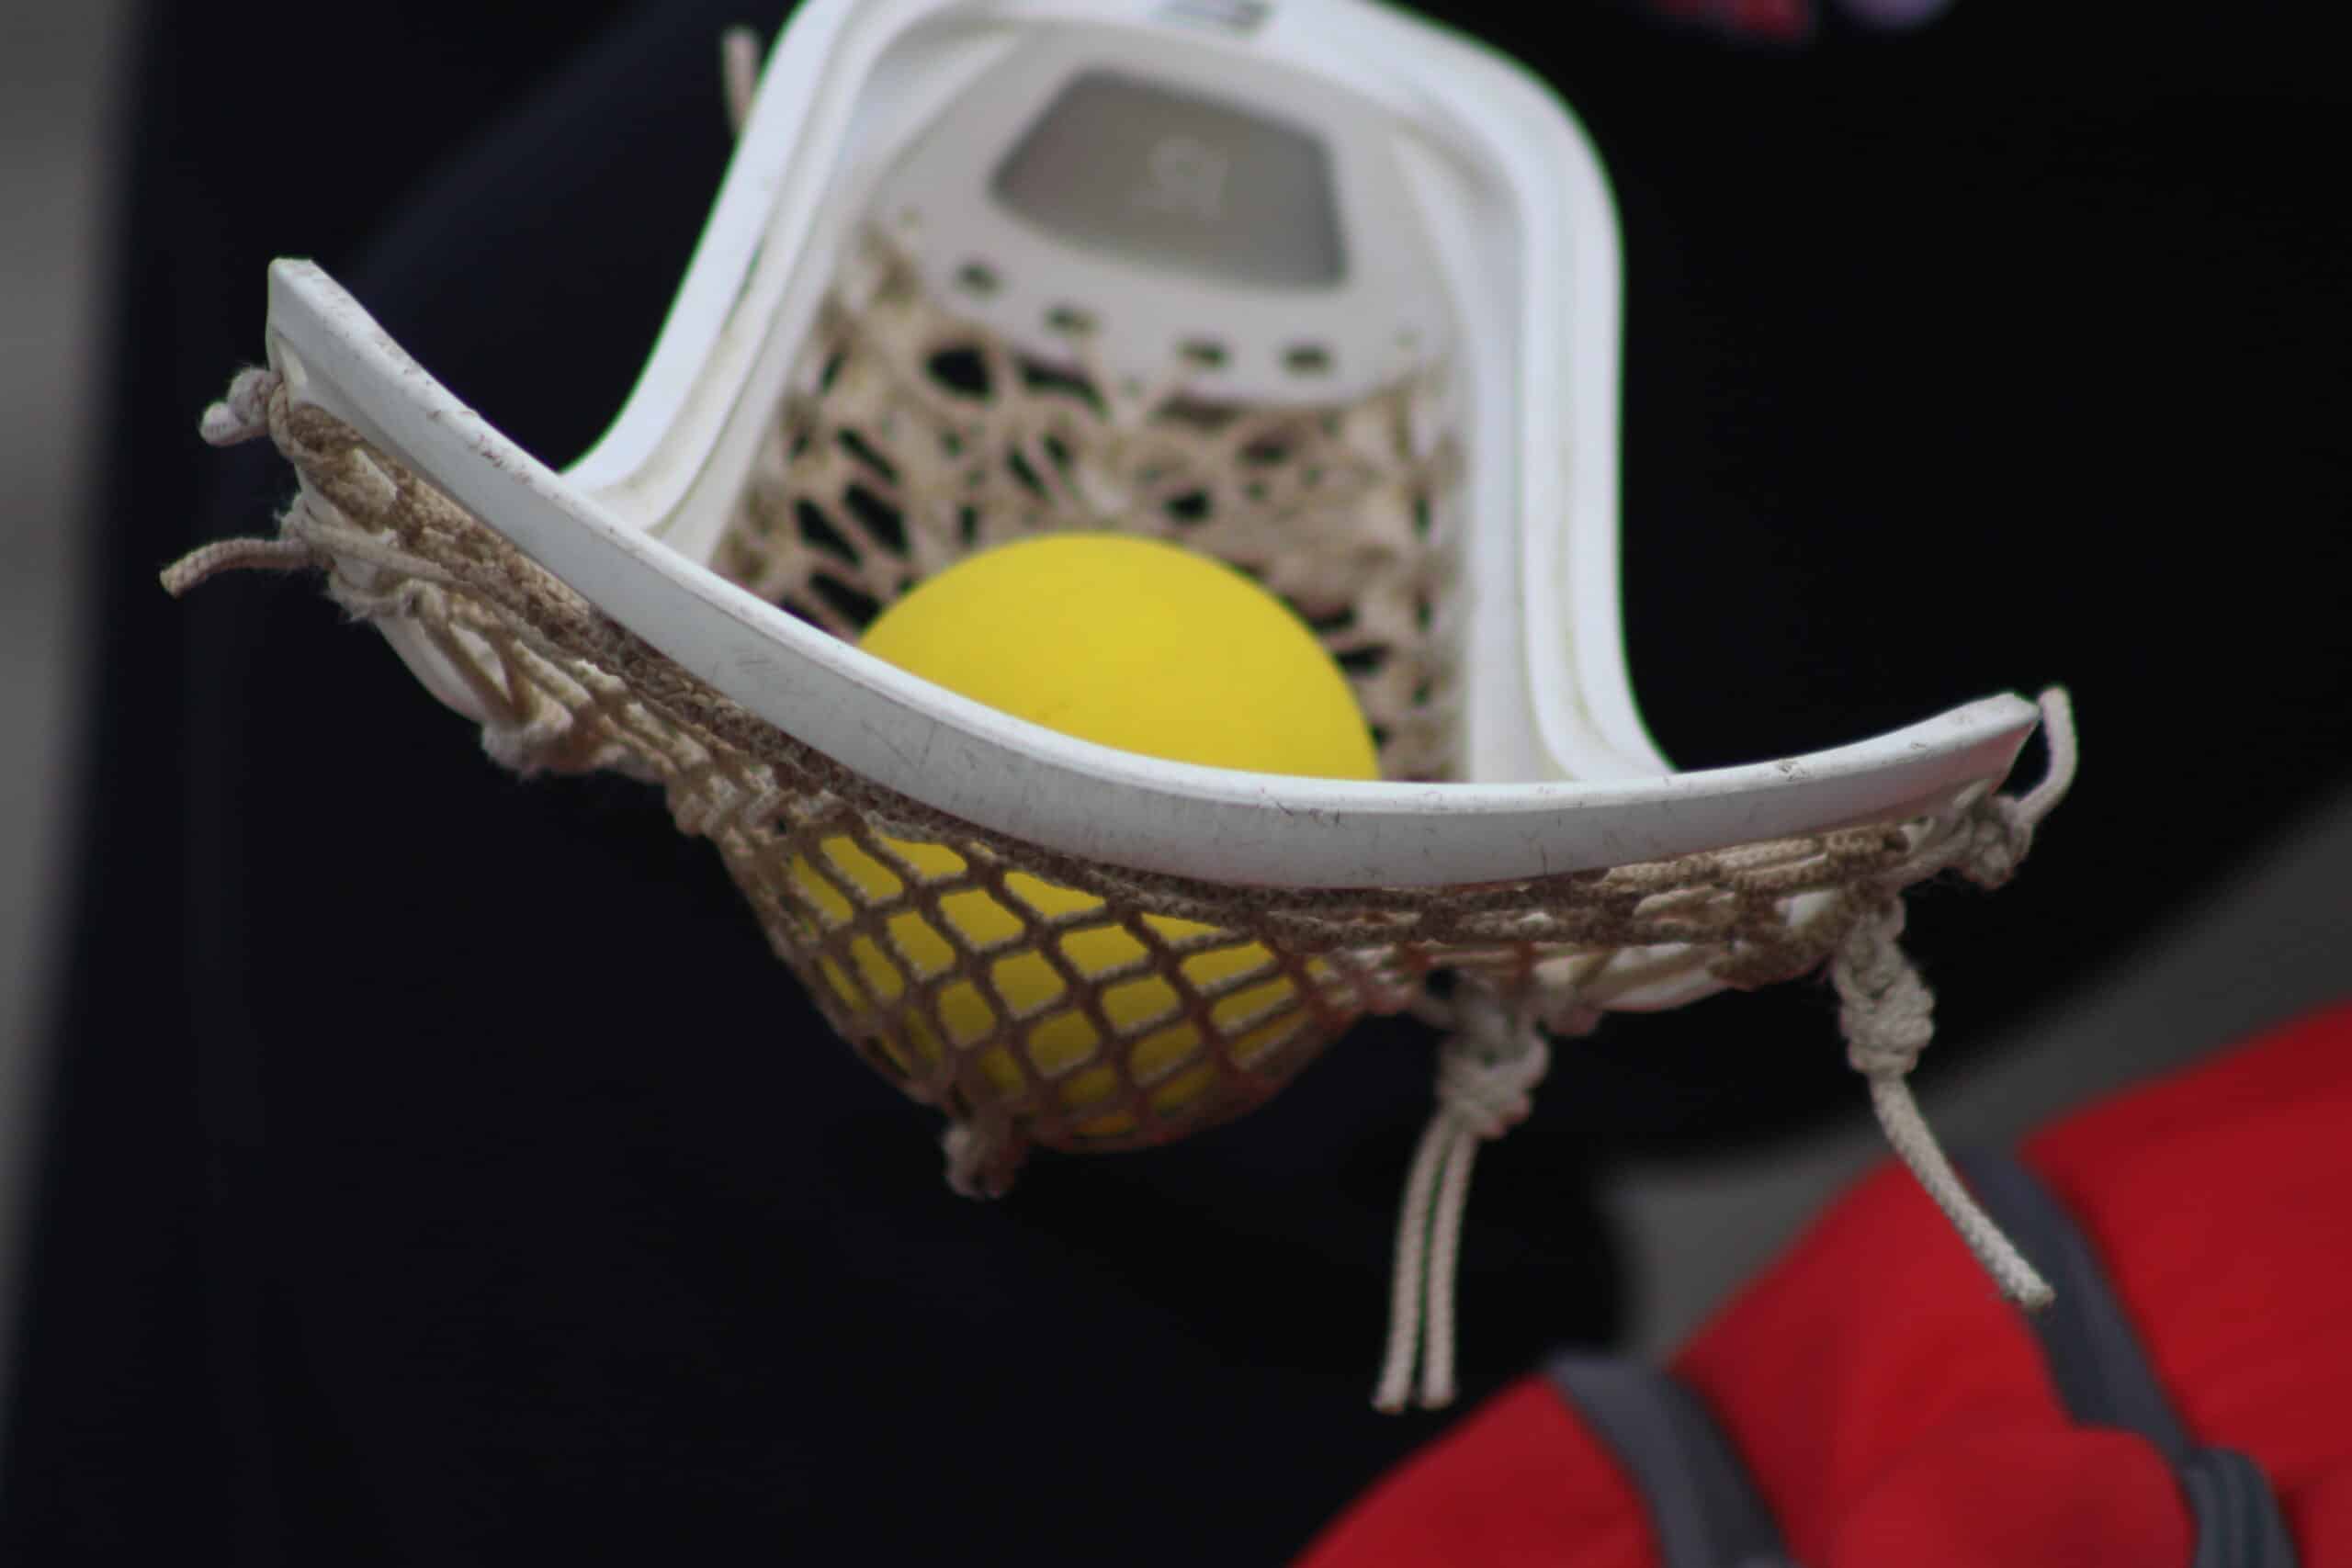 lacrosse ball in the basket of a stick